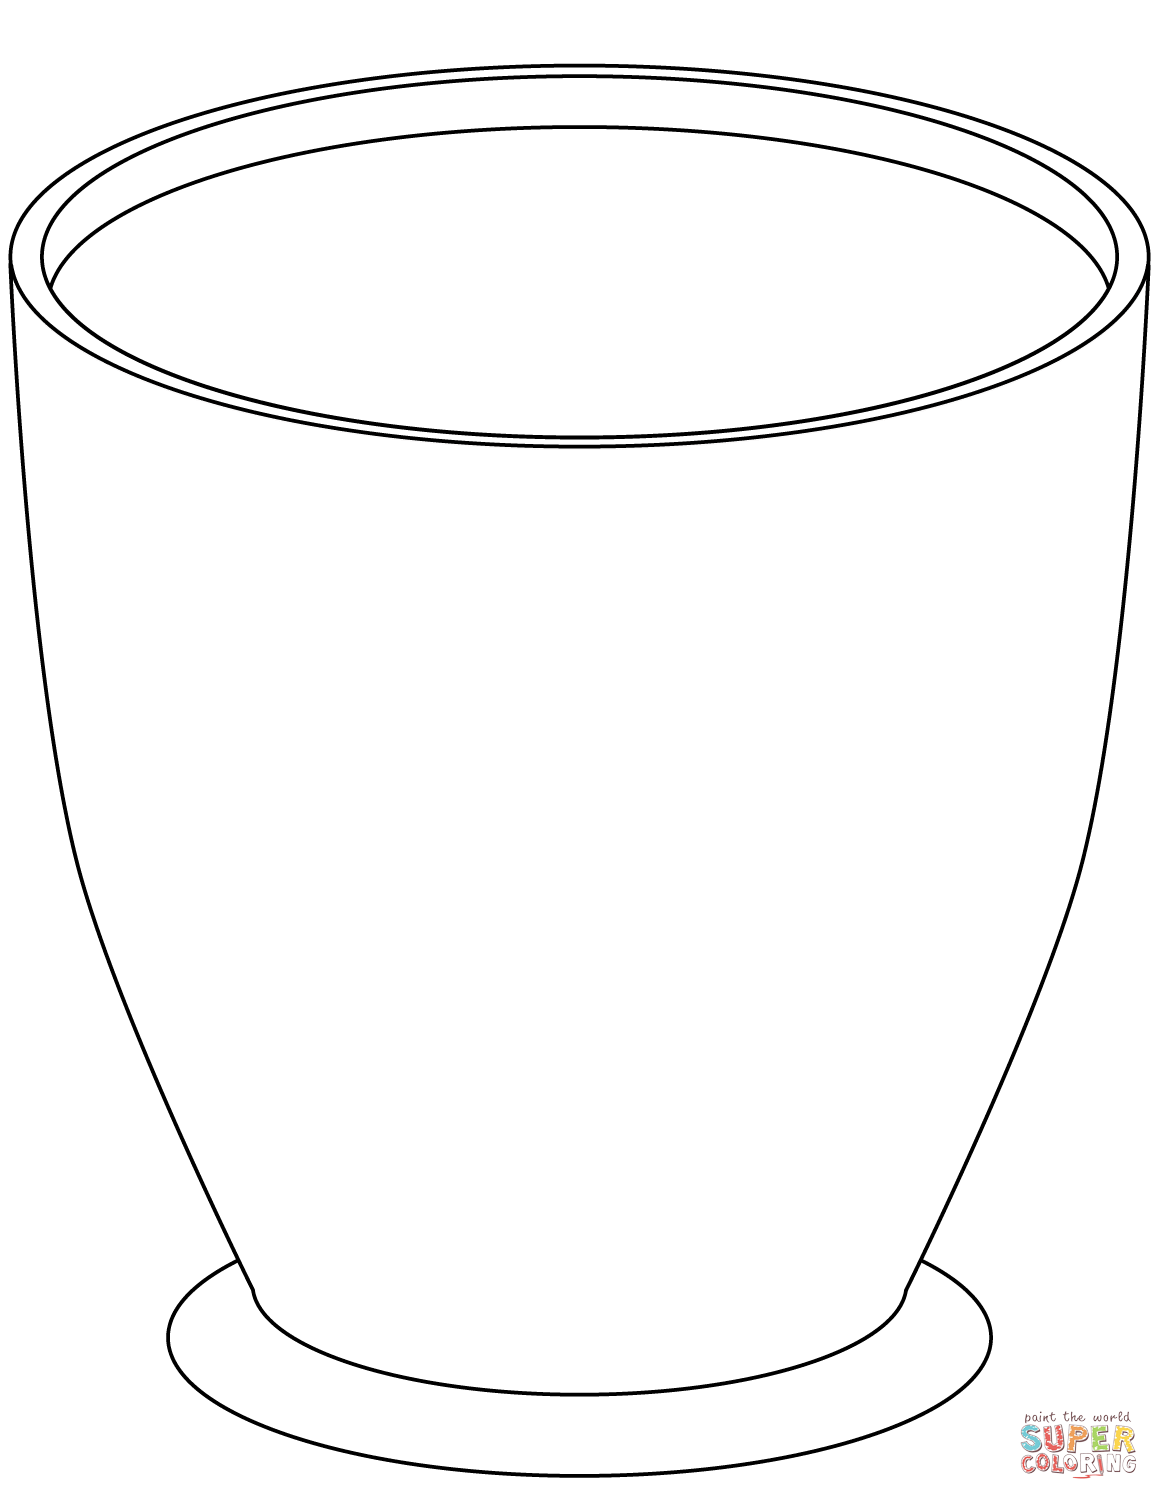 Large empty flower pot coloring page free printable coloring pages